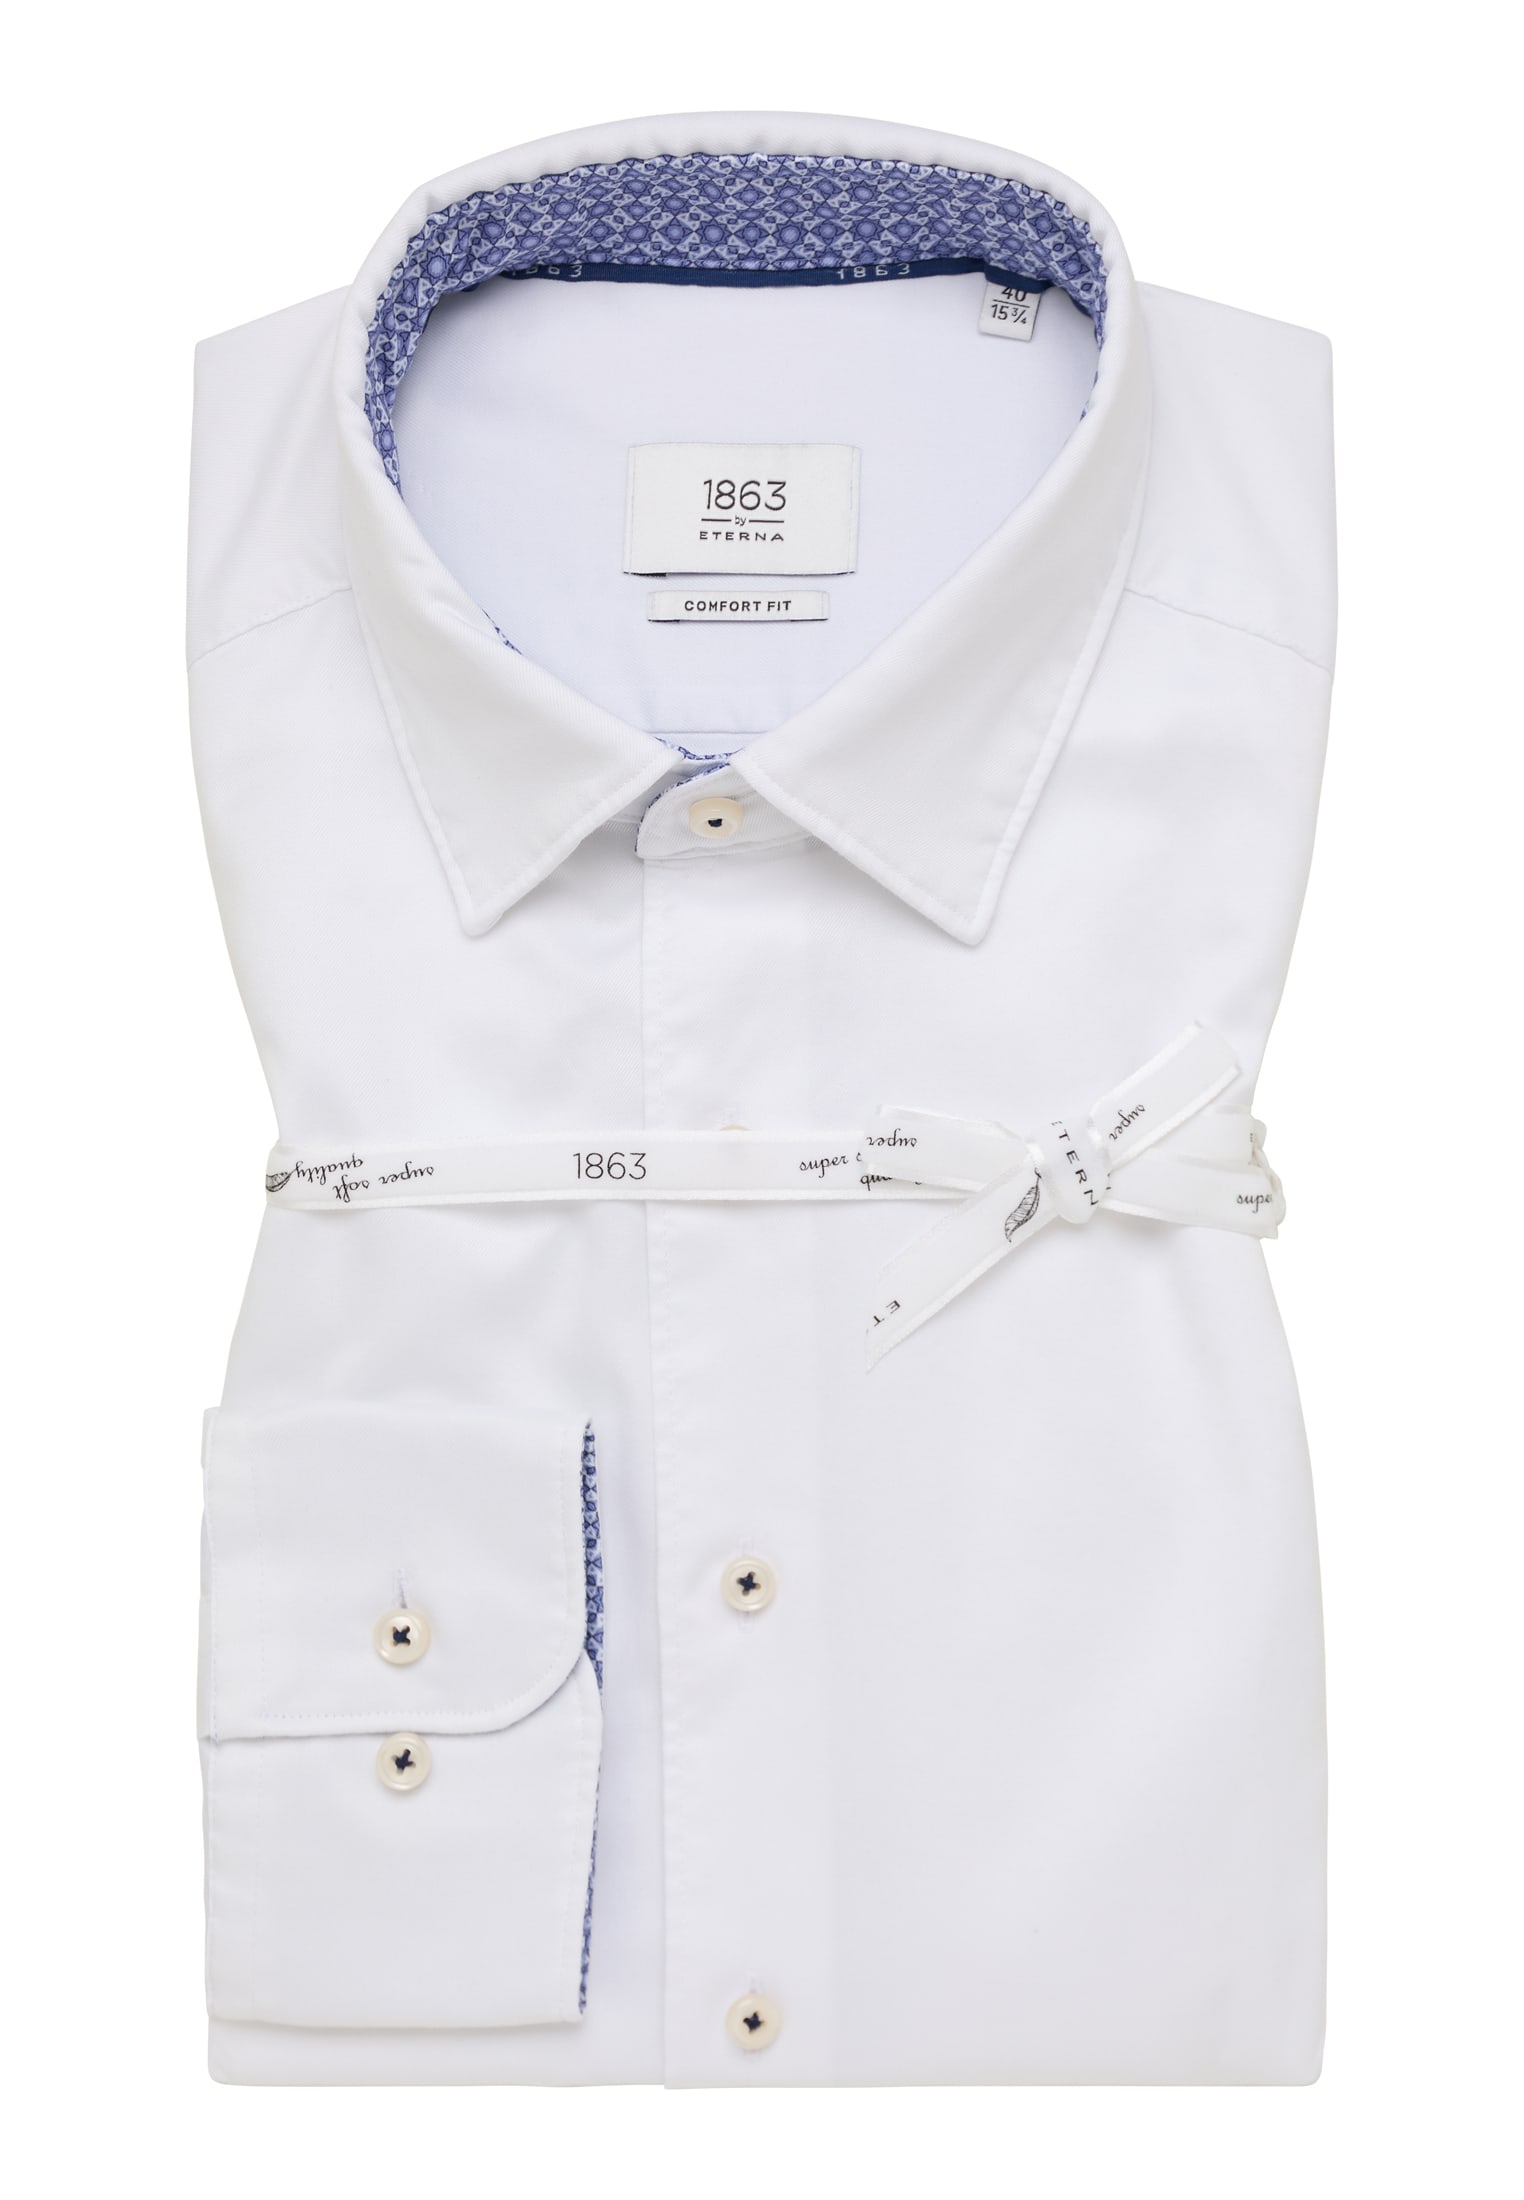 COMFORT FIT Soft Luxury Shirt in 47 unifarben | 1SH11589-00-02-47-1/1 off-white | | Langarm | off-white